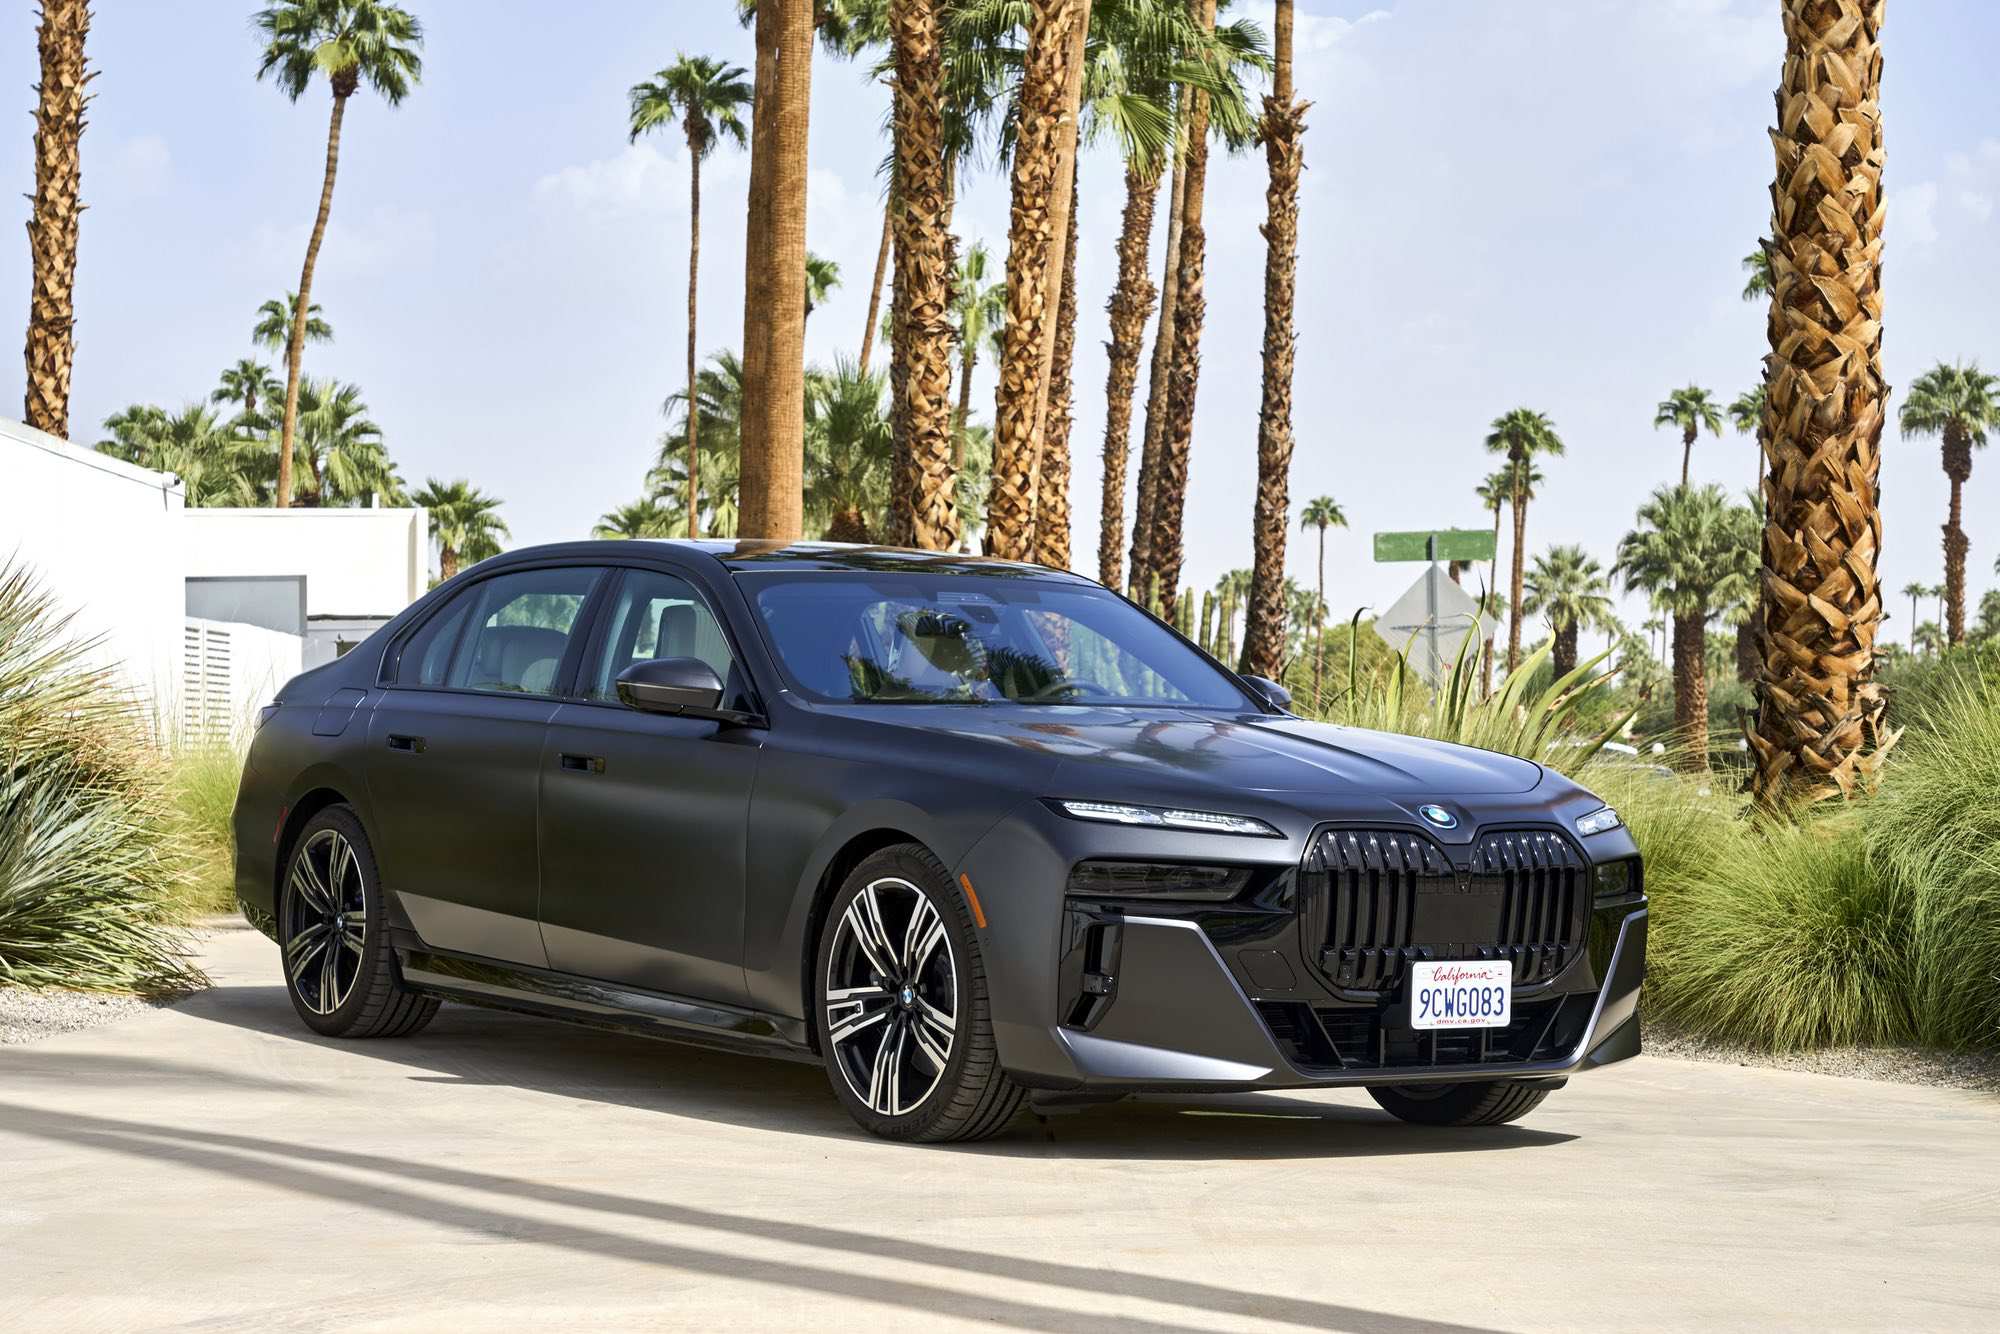 Review The 2023 Electric BMW i7 & BMW 760i Are the New Kings of Luxury